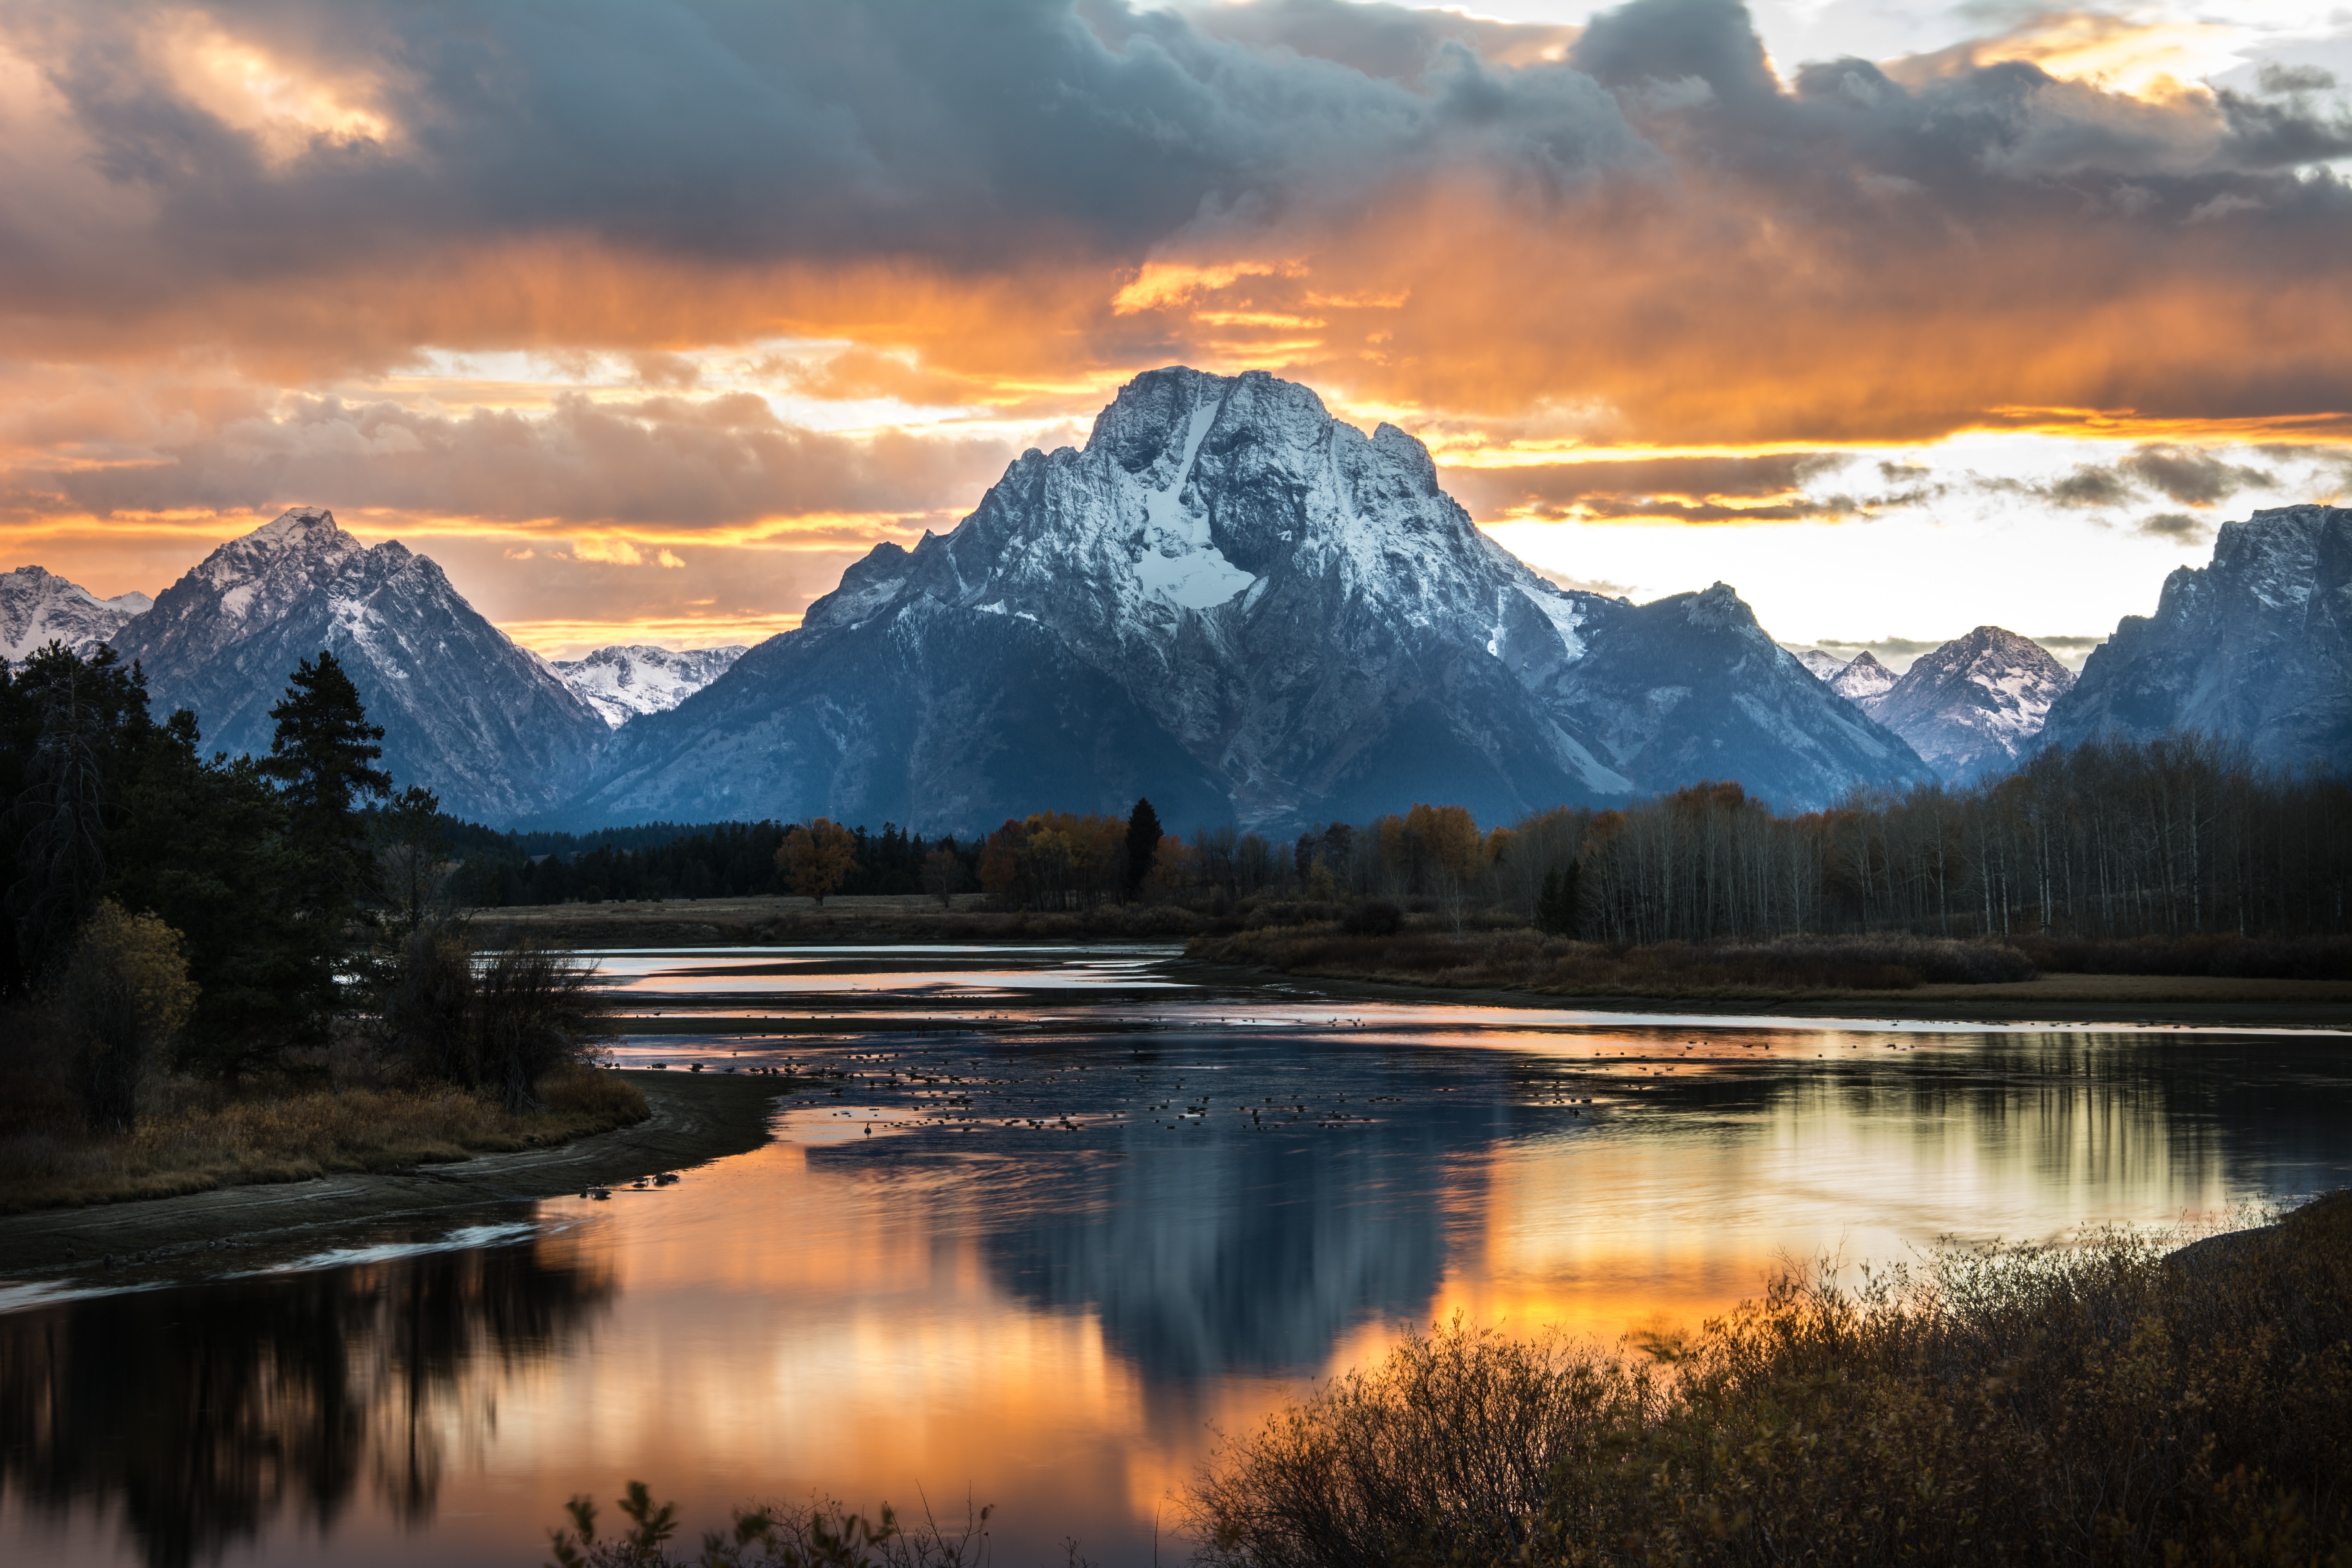 Grand Teton National Park oxbow bend. photo by Nate Foong